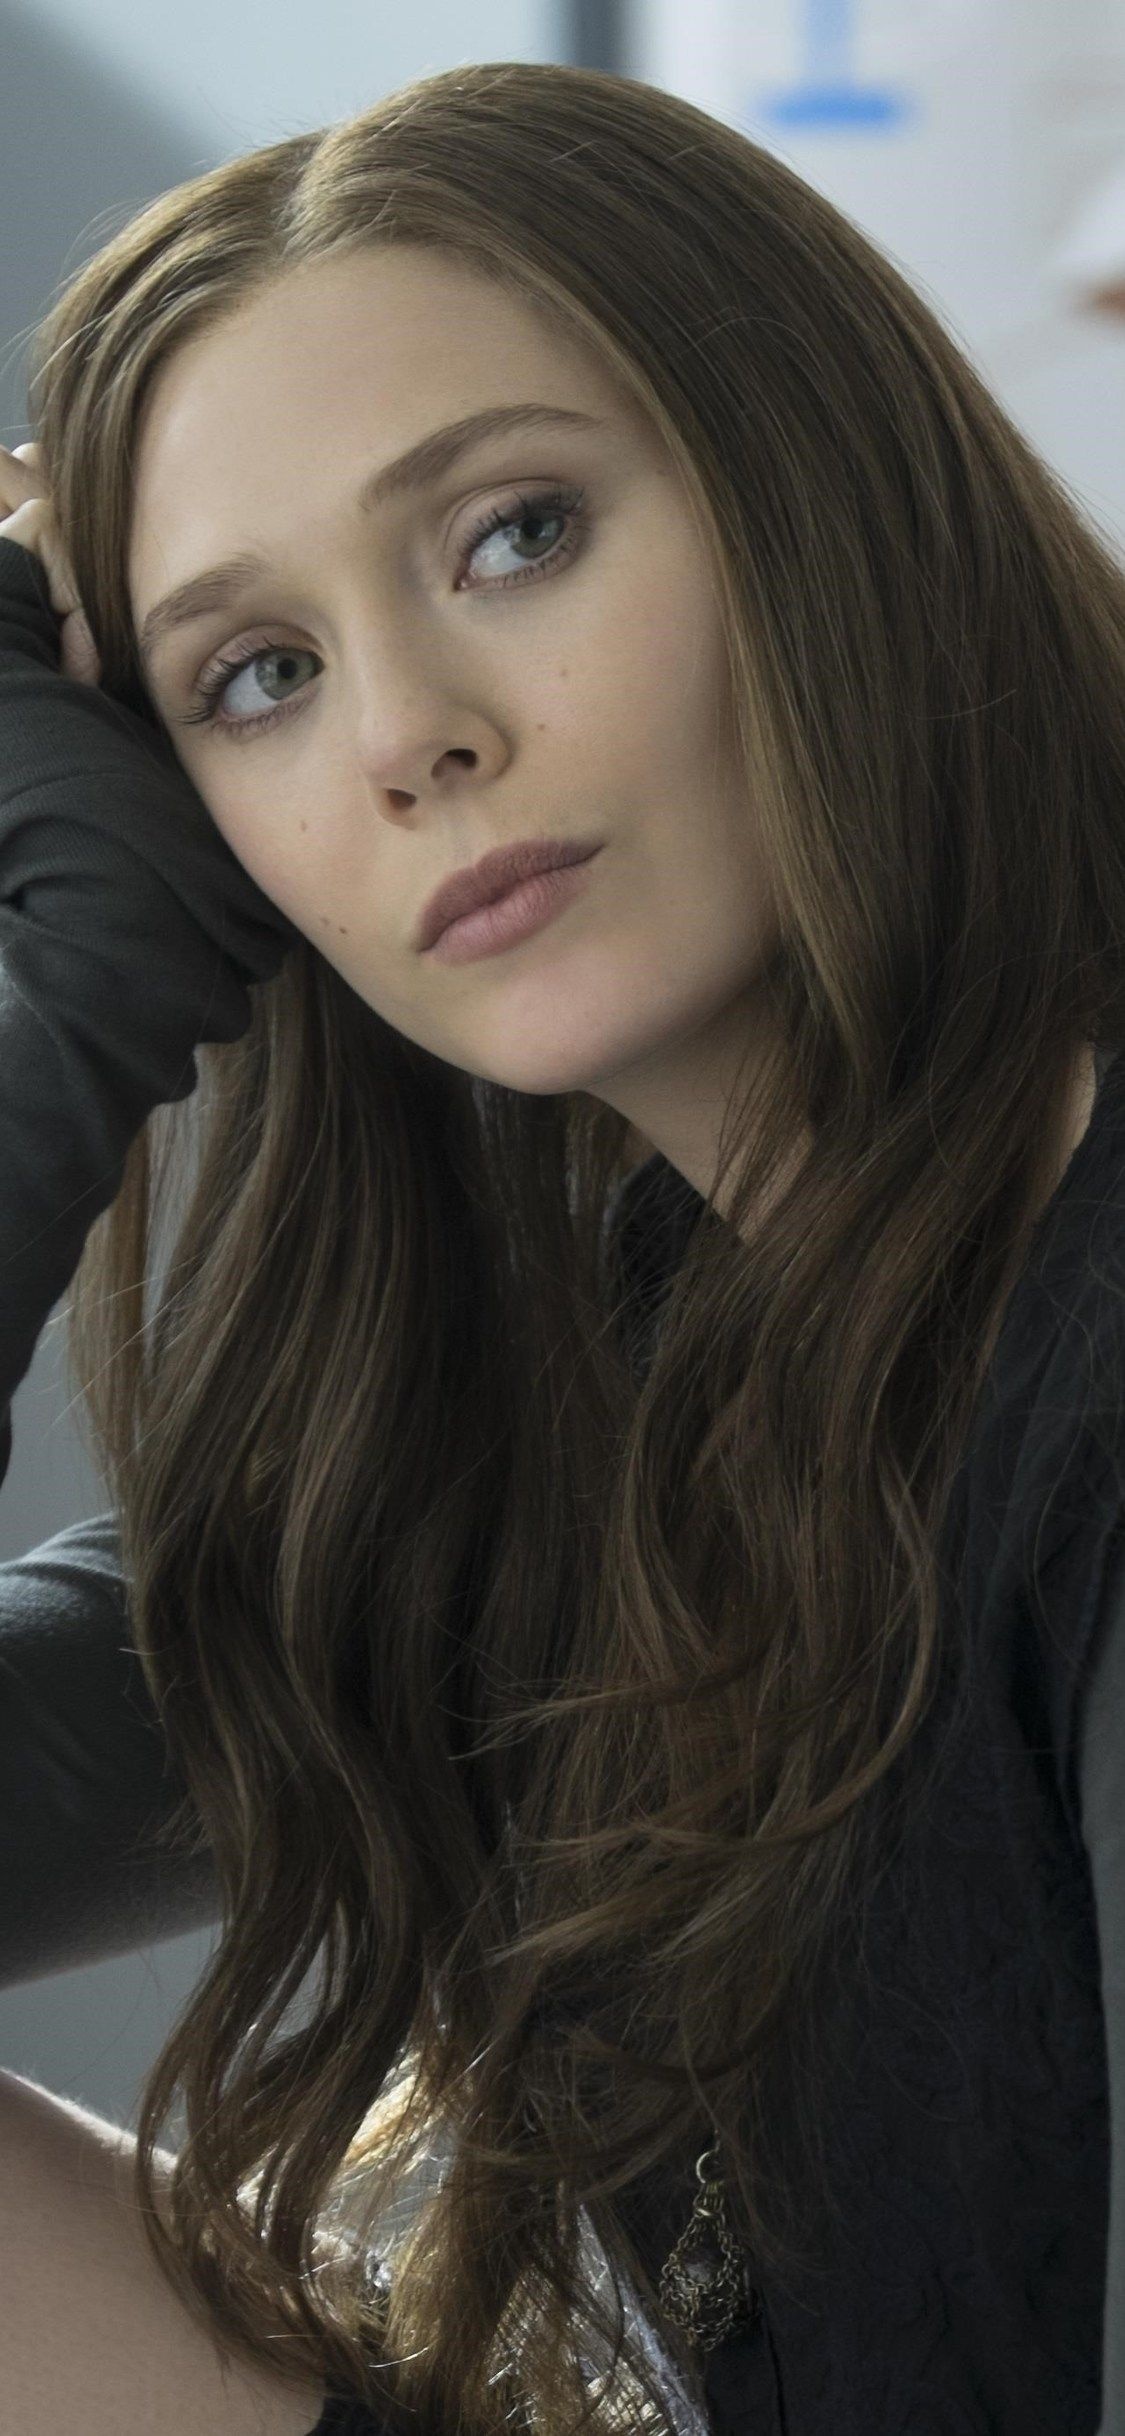 Scarlet Witch, Elizabeth Olsen wallpapers, Scarlett Witch actress, Stunning images, 1130x2440 HD Phone